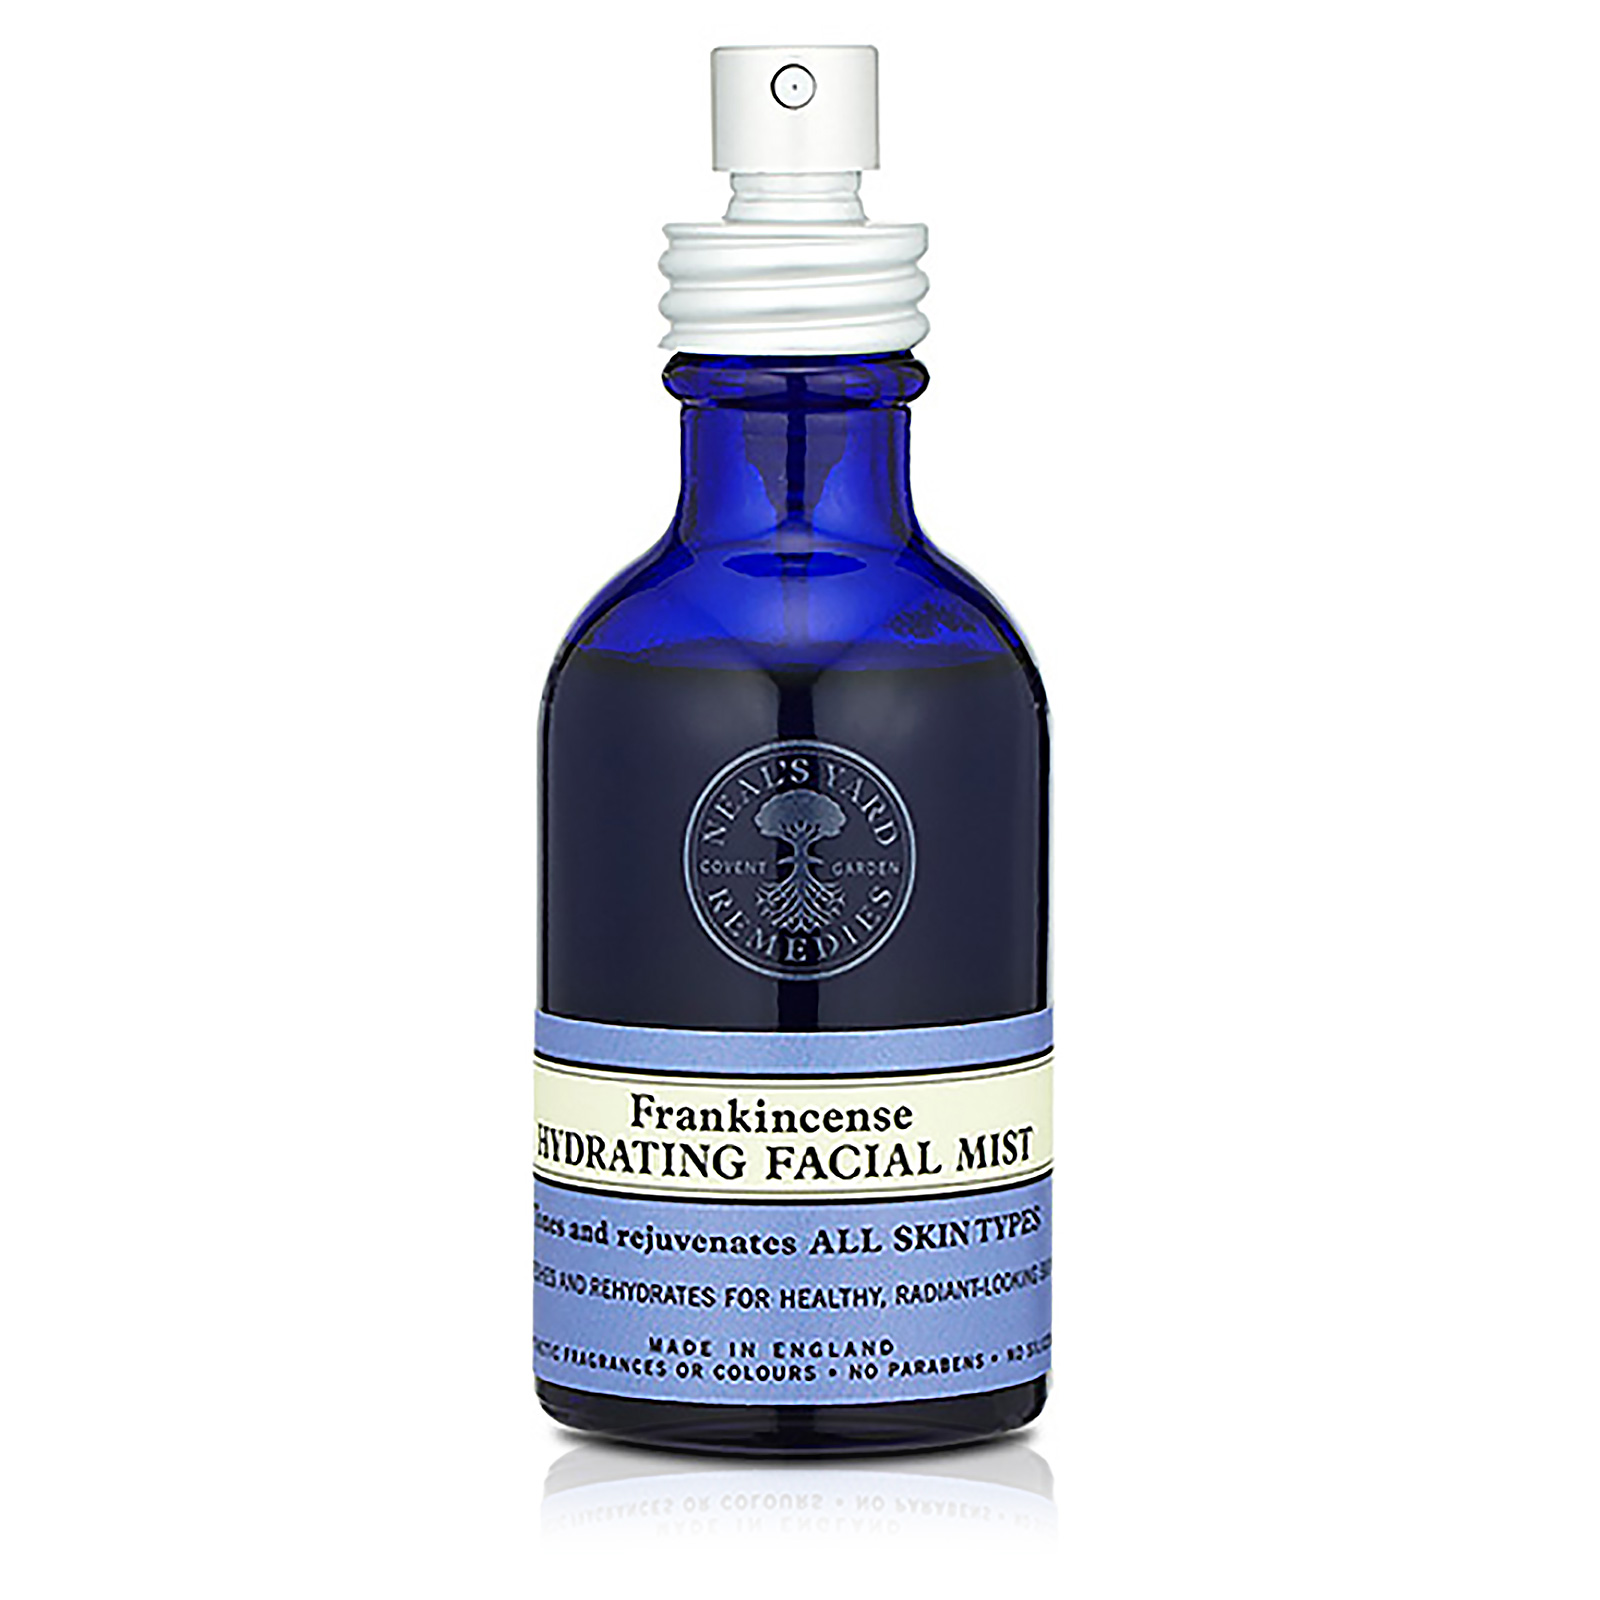 Frankincense Hydrating Facial Mist